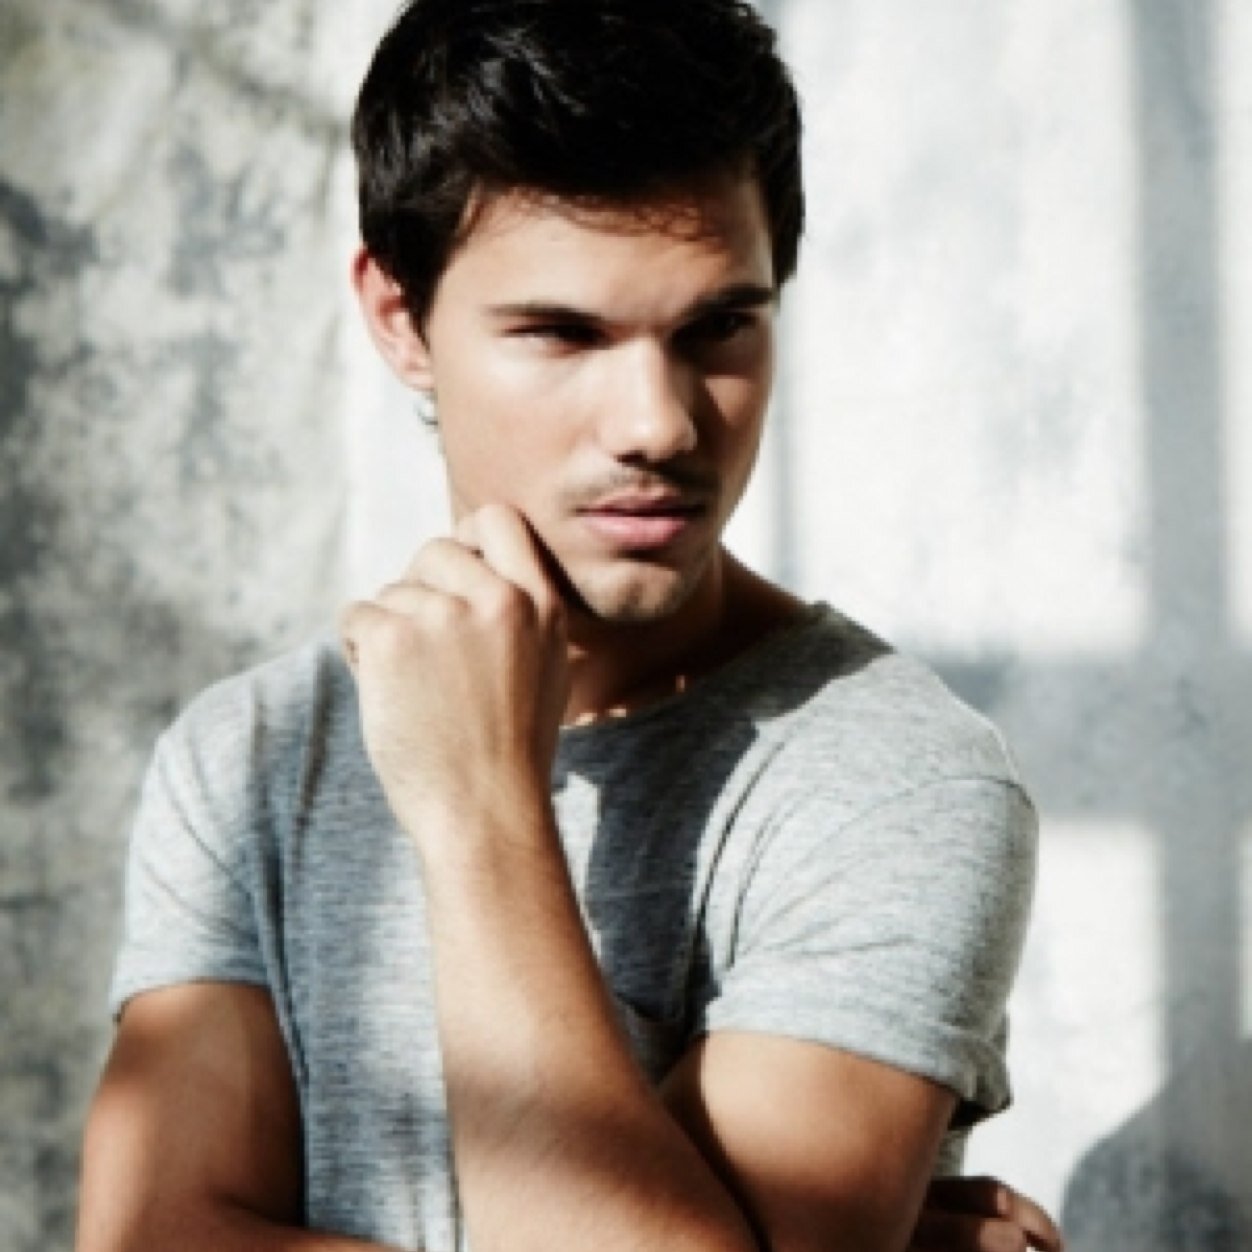 Taylor Lautner. 22. Actor. Next movie: 'Tracers'.